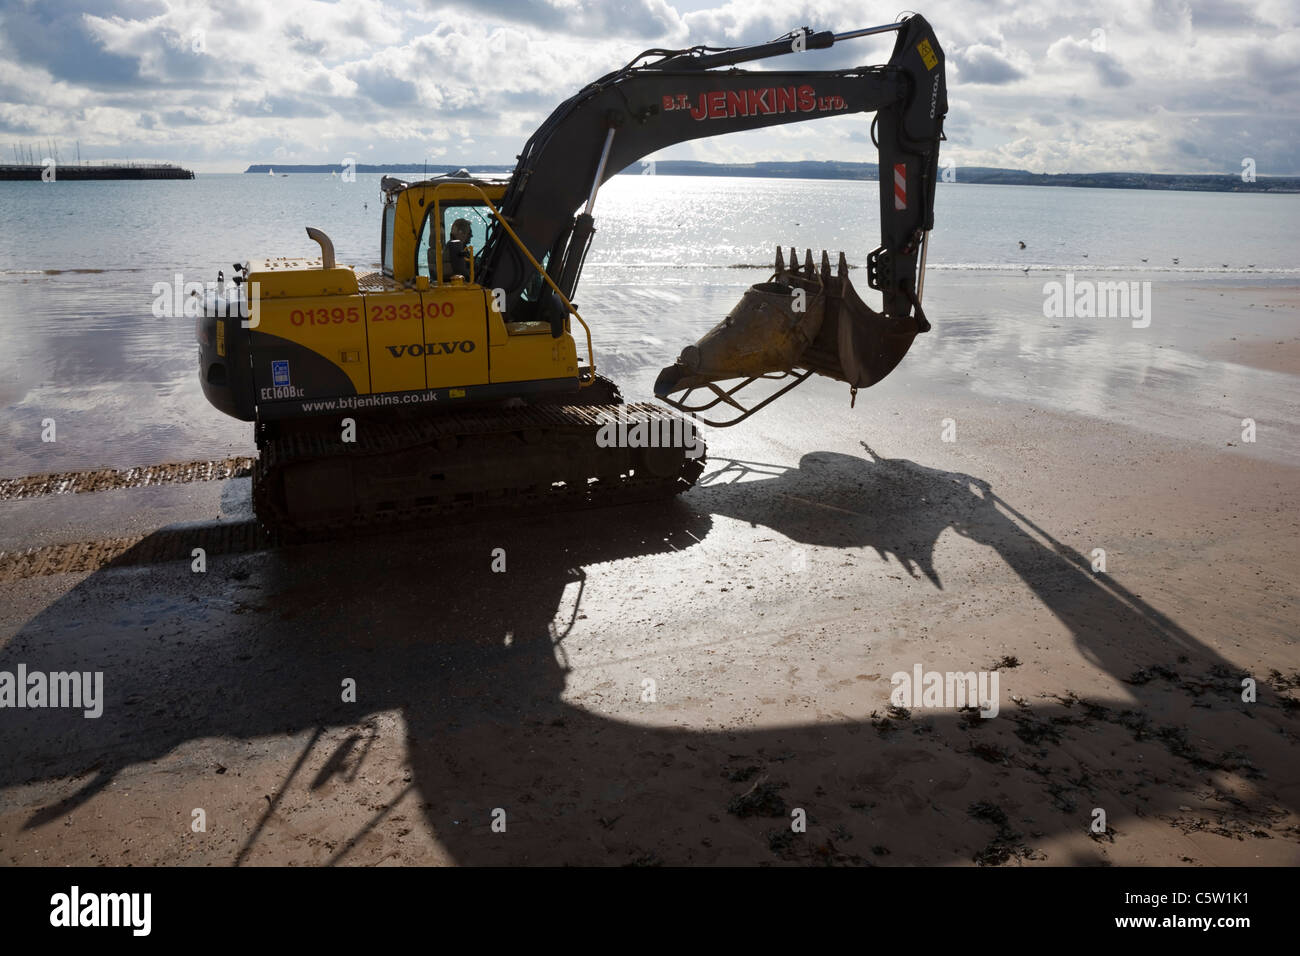 Large Volvo digger JCB style with shadow on the beach in Torquay Stock Photo